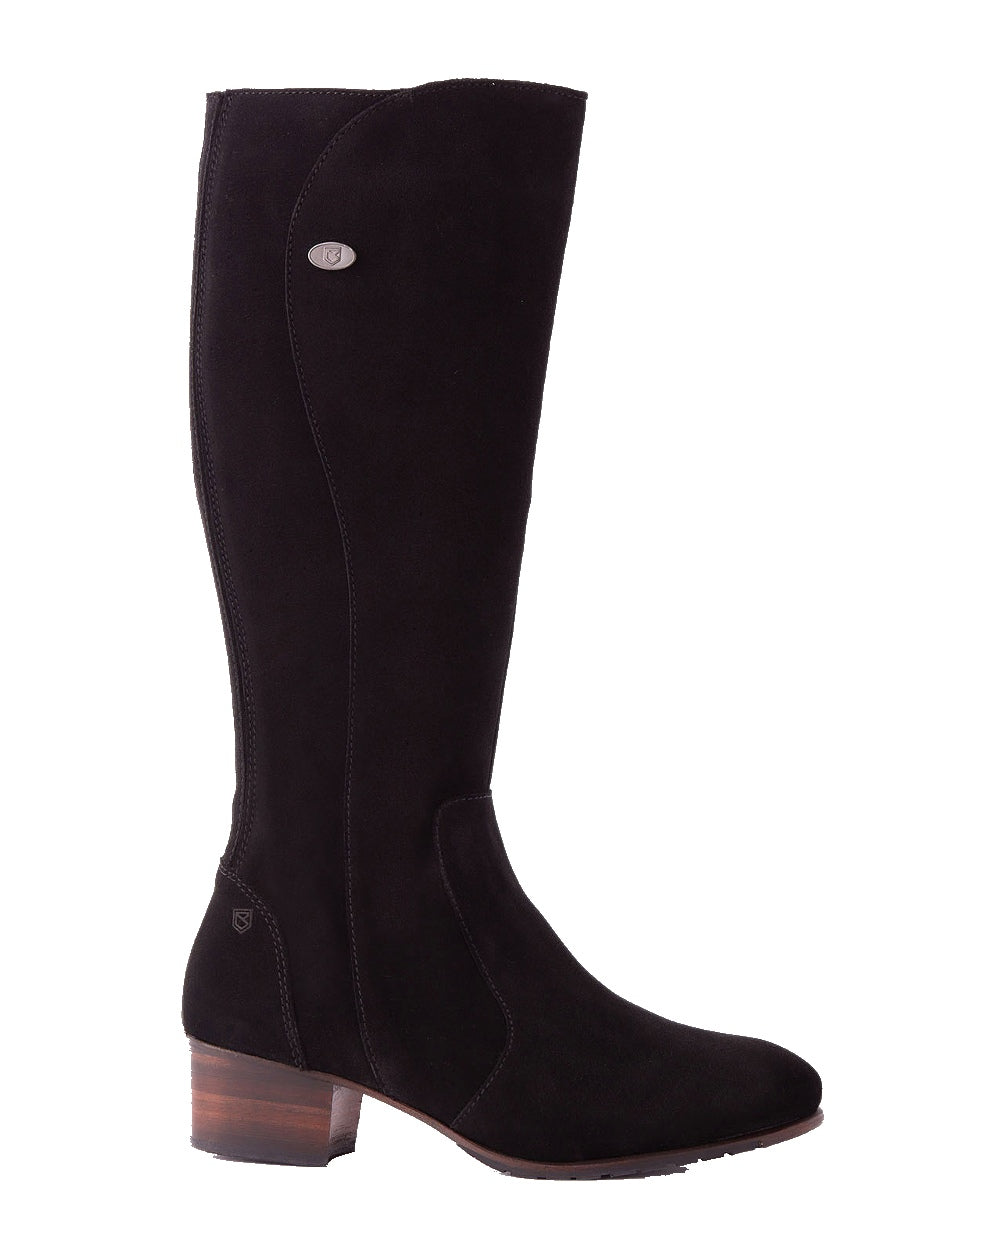 Dubarry Downpatrick Knee High Boots in Black Suede 